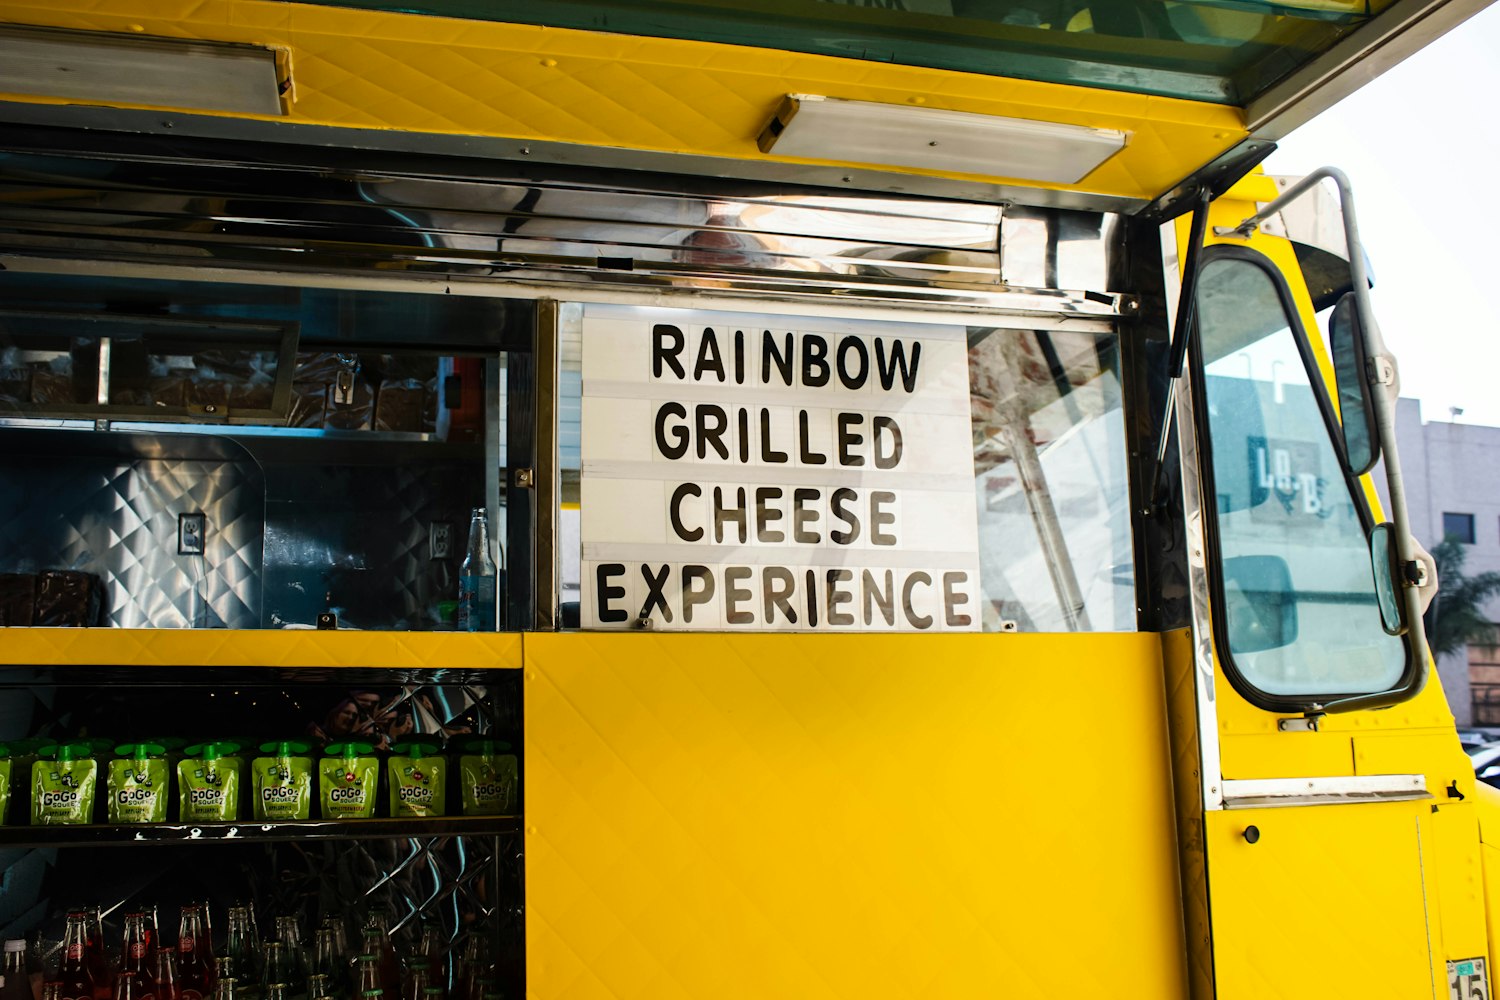 rainbow grilled cheese experience signage by Shari Sirotnak